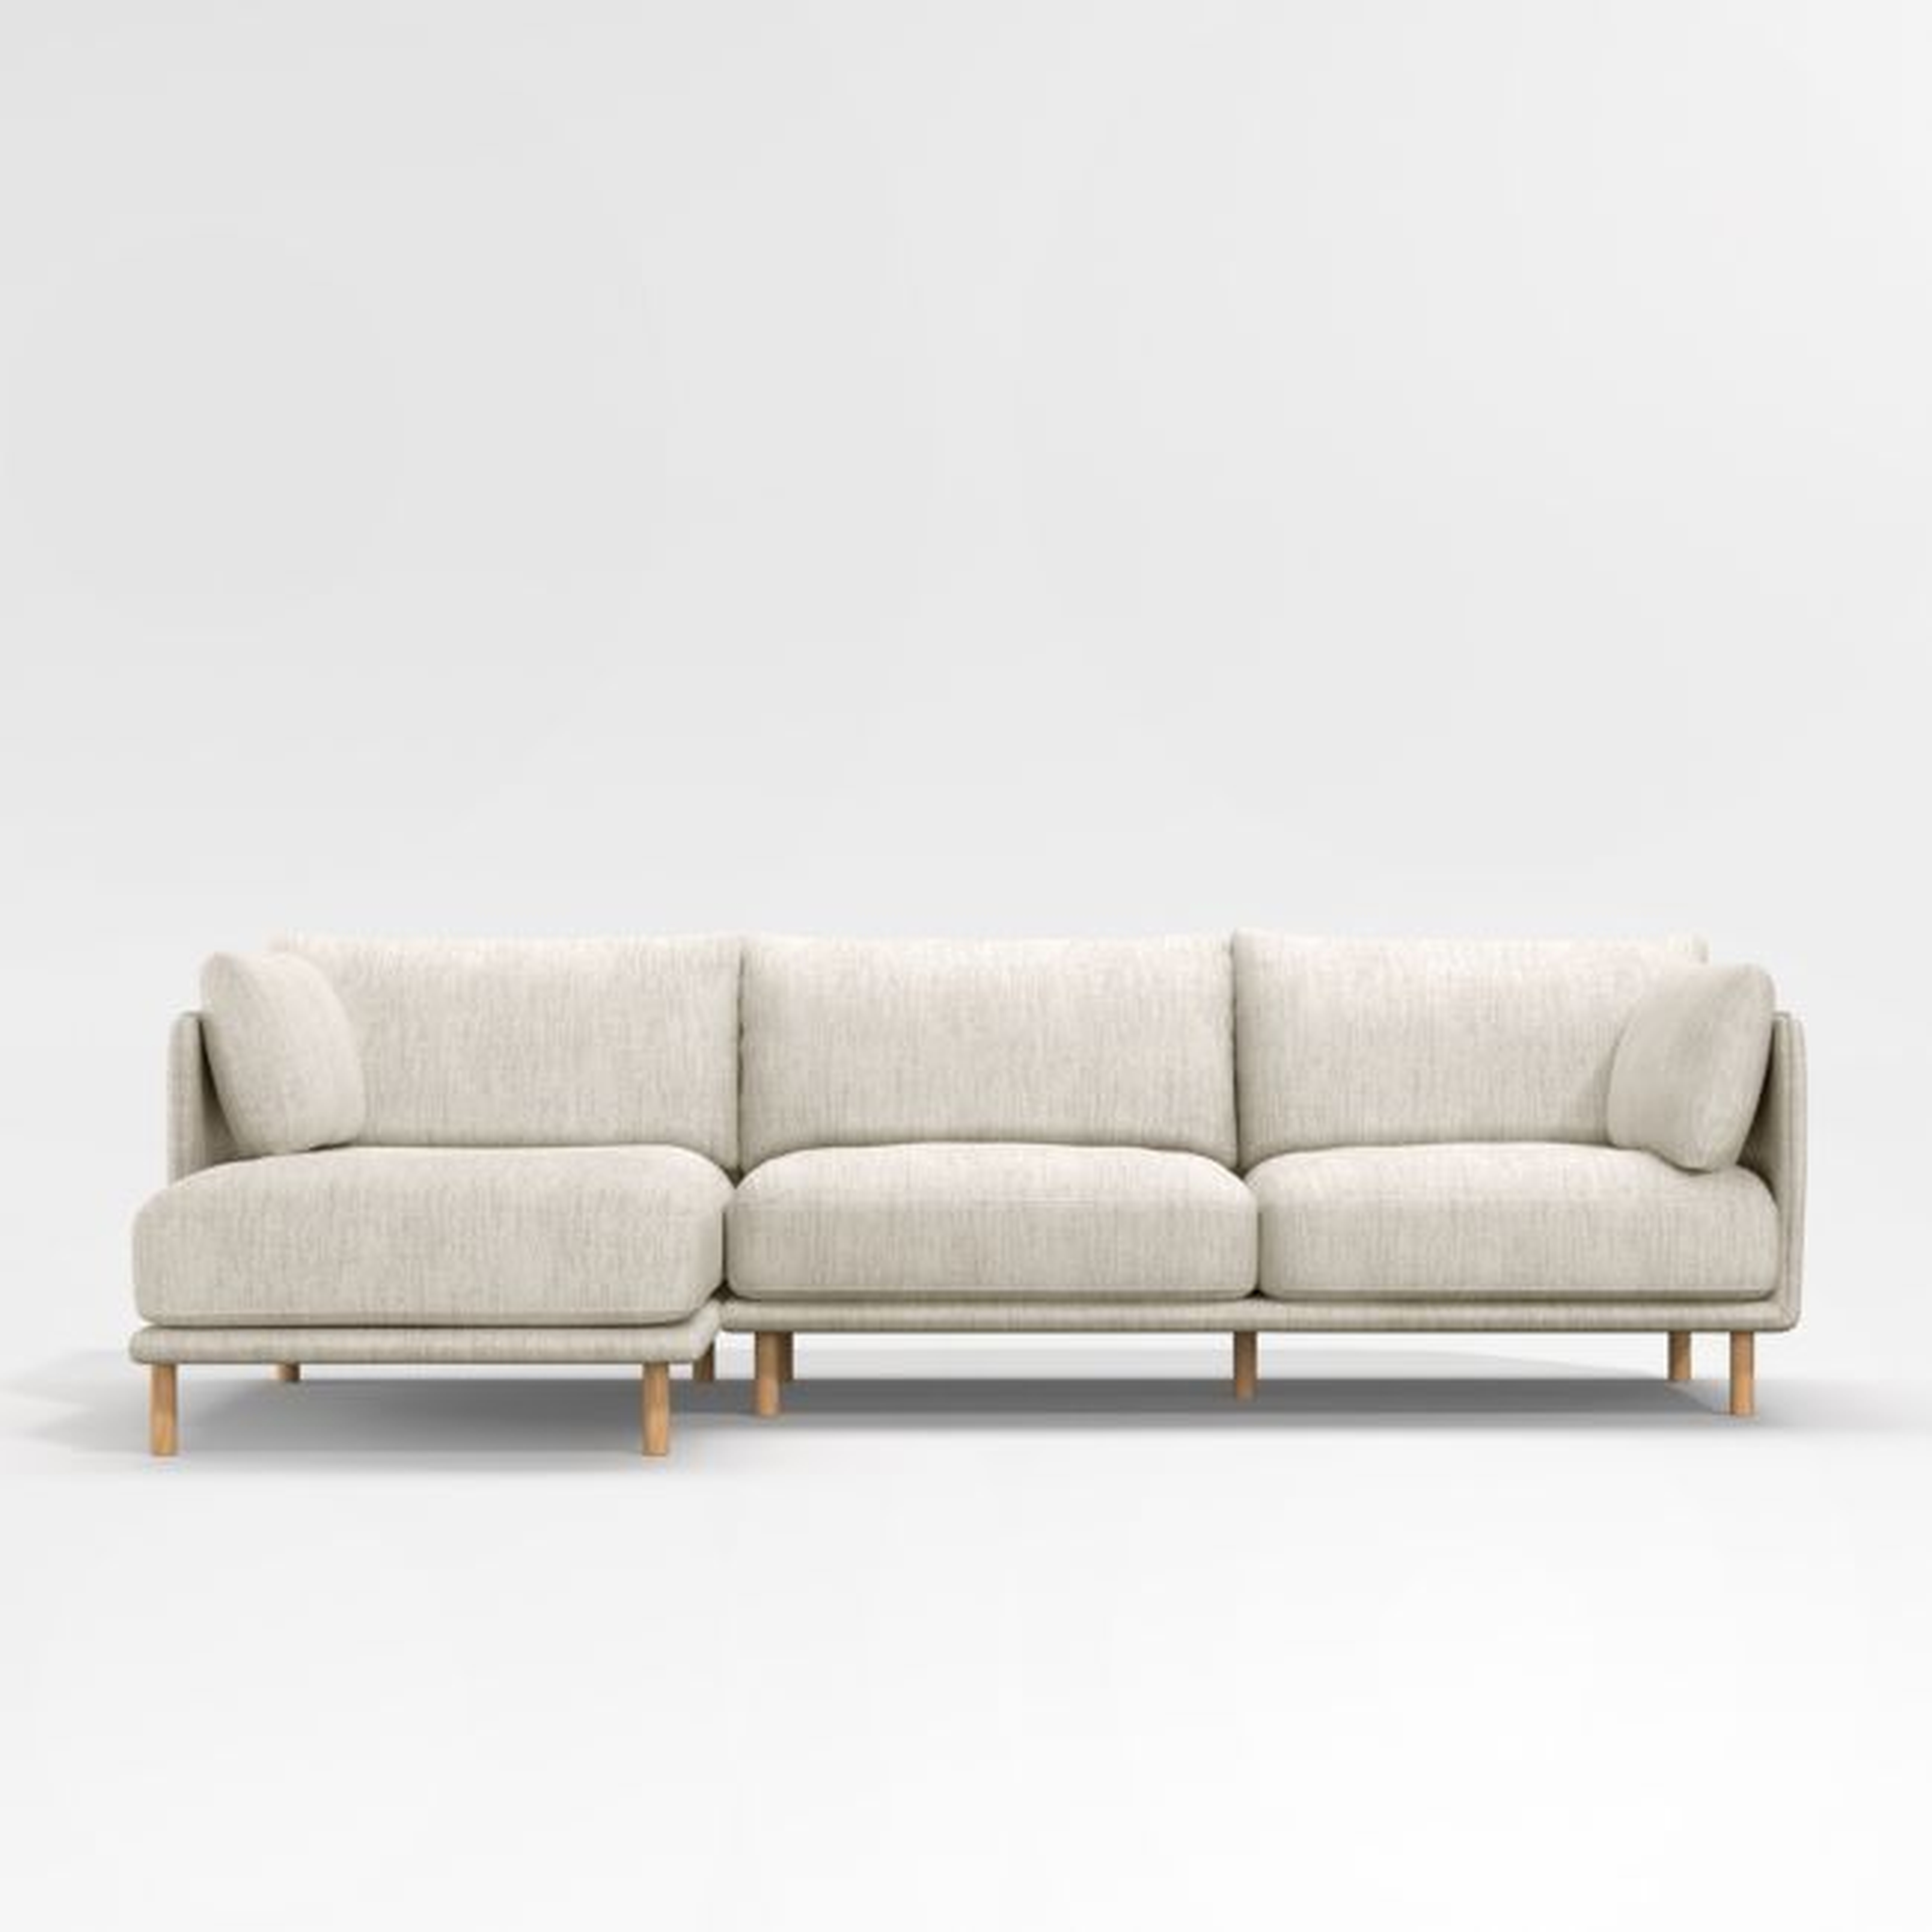 Wells 2-Piece Chaise Sectional with Natural Leg Finish, Tribute Gravel - Crate and Barrel